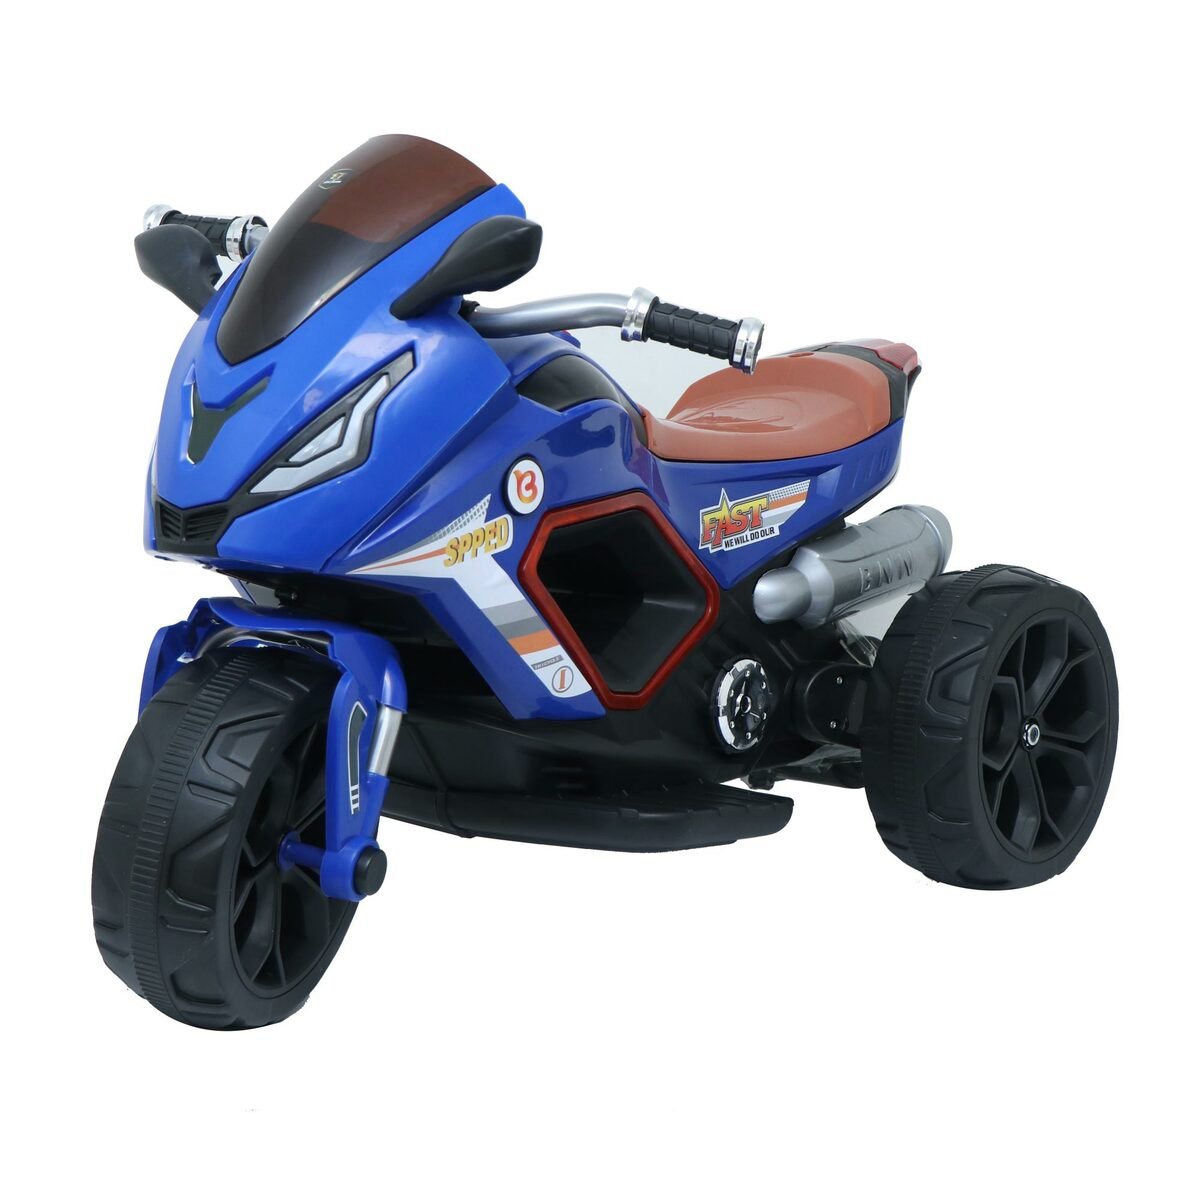 Skid Fusion Ride On Bike Rechargeable K-1200 Blue